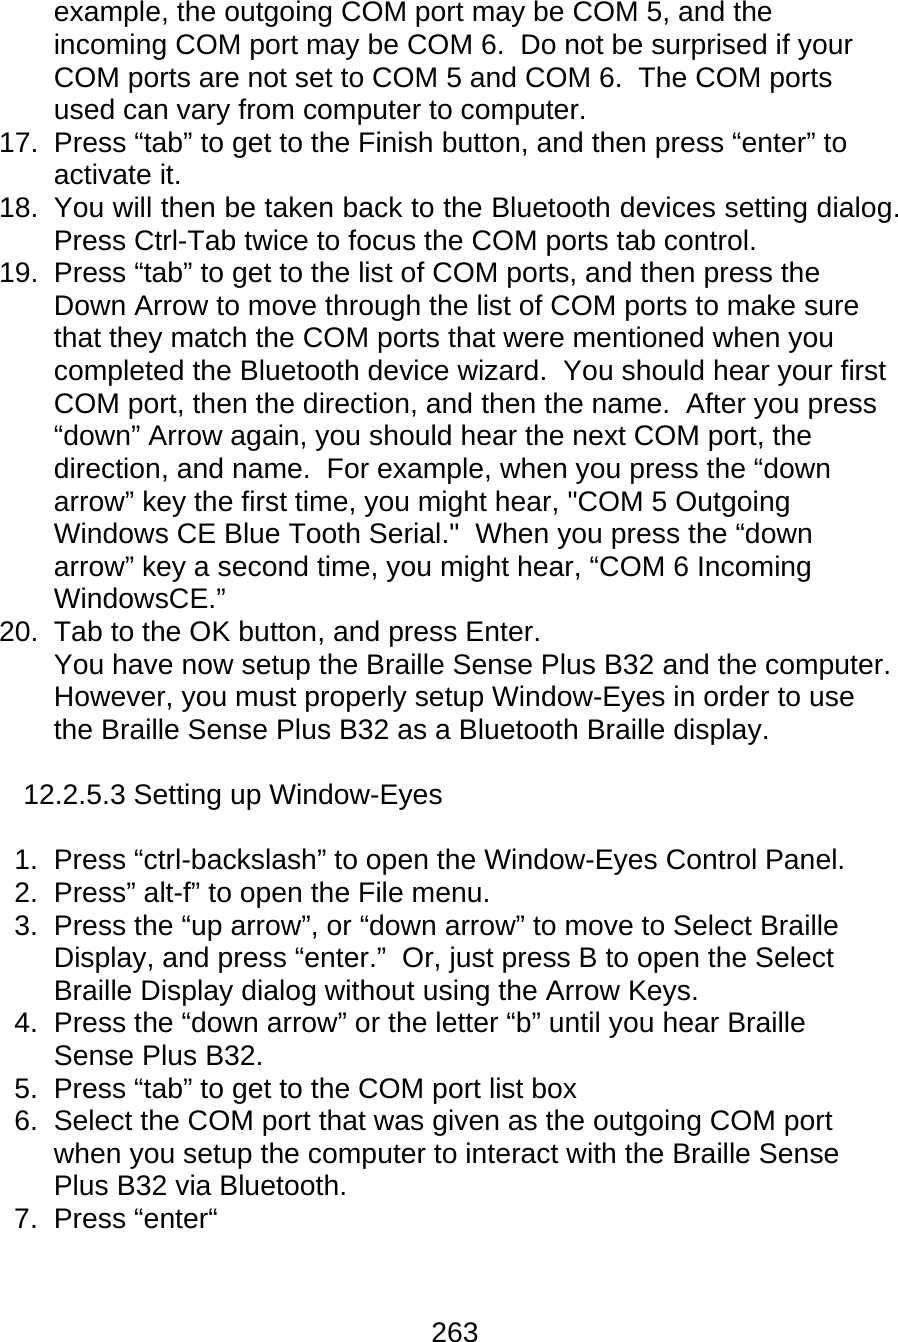 263  example, the outgoing COM port may be COM 5, and the incoming COM port may be COM 6.  Do not be surprised if your COM ports are not set to COM 5 and COM 6.  The COM ports used can vary from computer to computer. 17.  Press “tab” to get to the Finish button, and then press “enter” to activate it. 18.  You will then be taken back to the Bluetooth devices setting dialog.  Press Ctrl-Tab twice to focus the COM ports tab control. 19.  Press “tab” to get to the list of COM ports, and then press the Down Arrow to move through the list of COM ports to make sure that they match the COM ports that were mentioned when you completed the Bluetooth device wizard.  You should hear your first COM port, then the direction, and then the name.  After you press “down” Arrow again, you should hear the next COM port, the direction, and name.  For example, when you press the “down arrow” key the first time, you might hear, &quot;COM 5 Outgoing Windows CE Blue Tooth Serial.&quot;  When you press the “down arrow” key a second time, you might hear, “COM 6 Incoming WindowsCE.” 20.  Tab to the OK button, and press Enter. You have now setup the Braille Sense Plus B32 and the computer.  However, you must properly setup Window-Eyes in order to use the Braille Sense Plus B32 as a Bluetooth Braille display.    12.2.5.3 Setting up Window-Eyes  1.  Press “ctrl-backslash” to open the Window-Eyes Control Panel. 2. Press” alt-f” to open the File menu. 3.  Press the “up arrow”, or “down arrow” to move to Select Braille Display, and press “enter.”  Or, just press B to open the Select Braille Display dialog without using the Arrow Keys. 4.  Press the “down arrow” or the letter “b” until you hear Braille Sense Plus B32. 5.  Press “tab” to get to the COM port list box 6.  Select the COM port that was given as the outgoing COM port when you setup the computer to interact with the Braille Sense Plus B32 via Bluetooth. 7. Press “enter“  